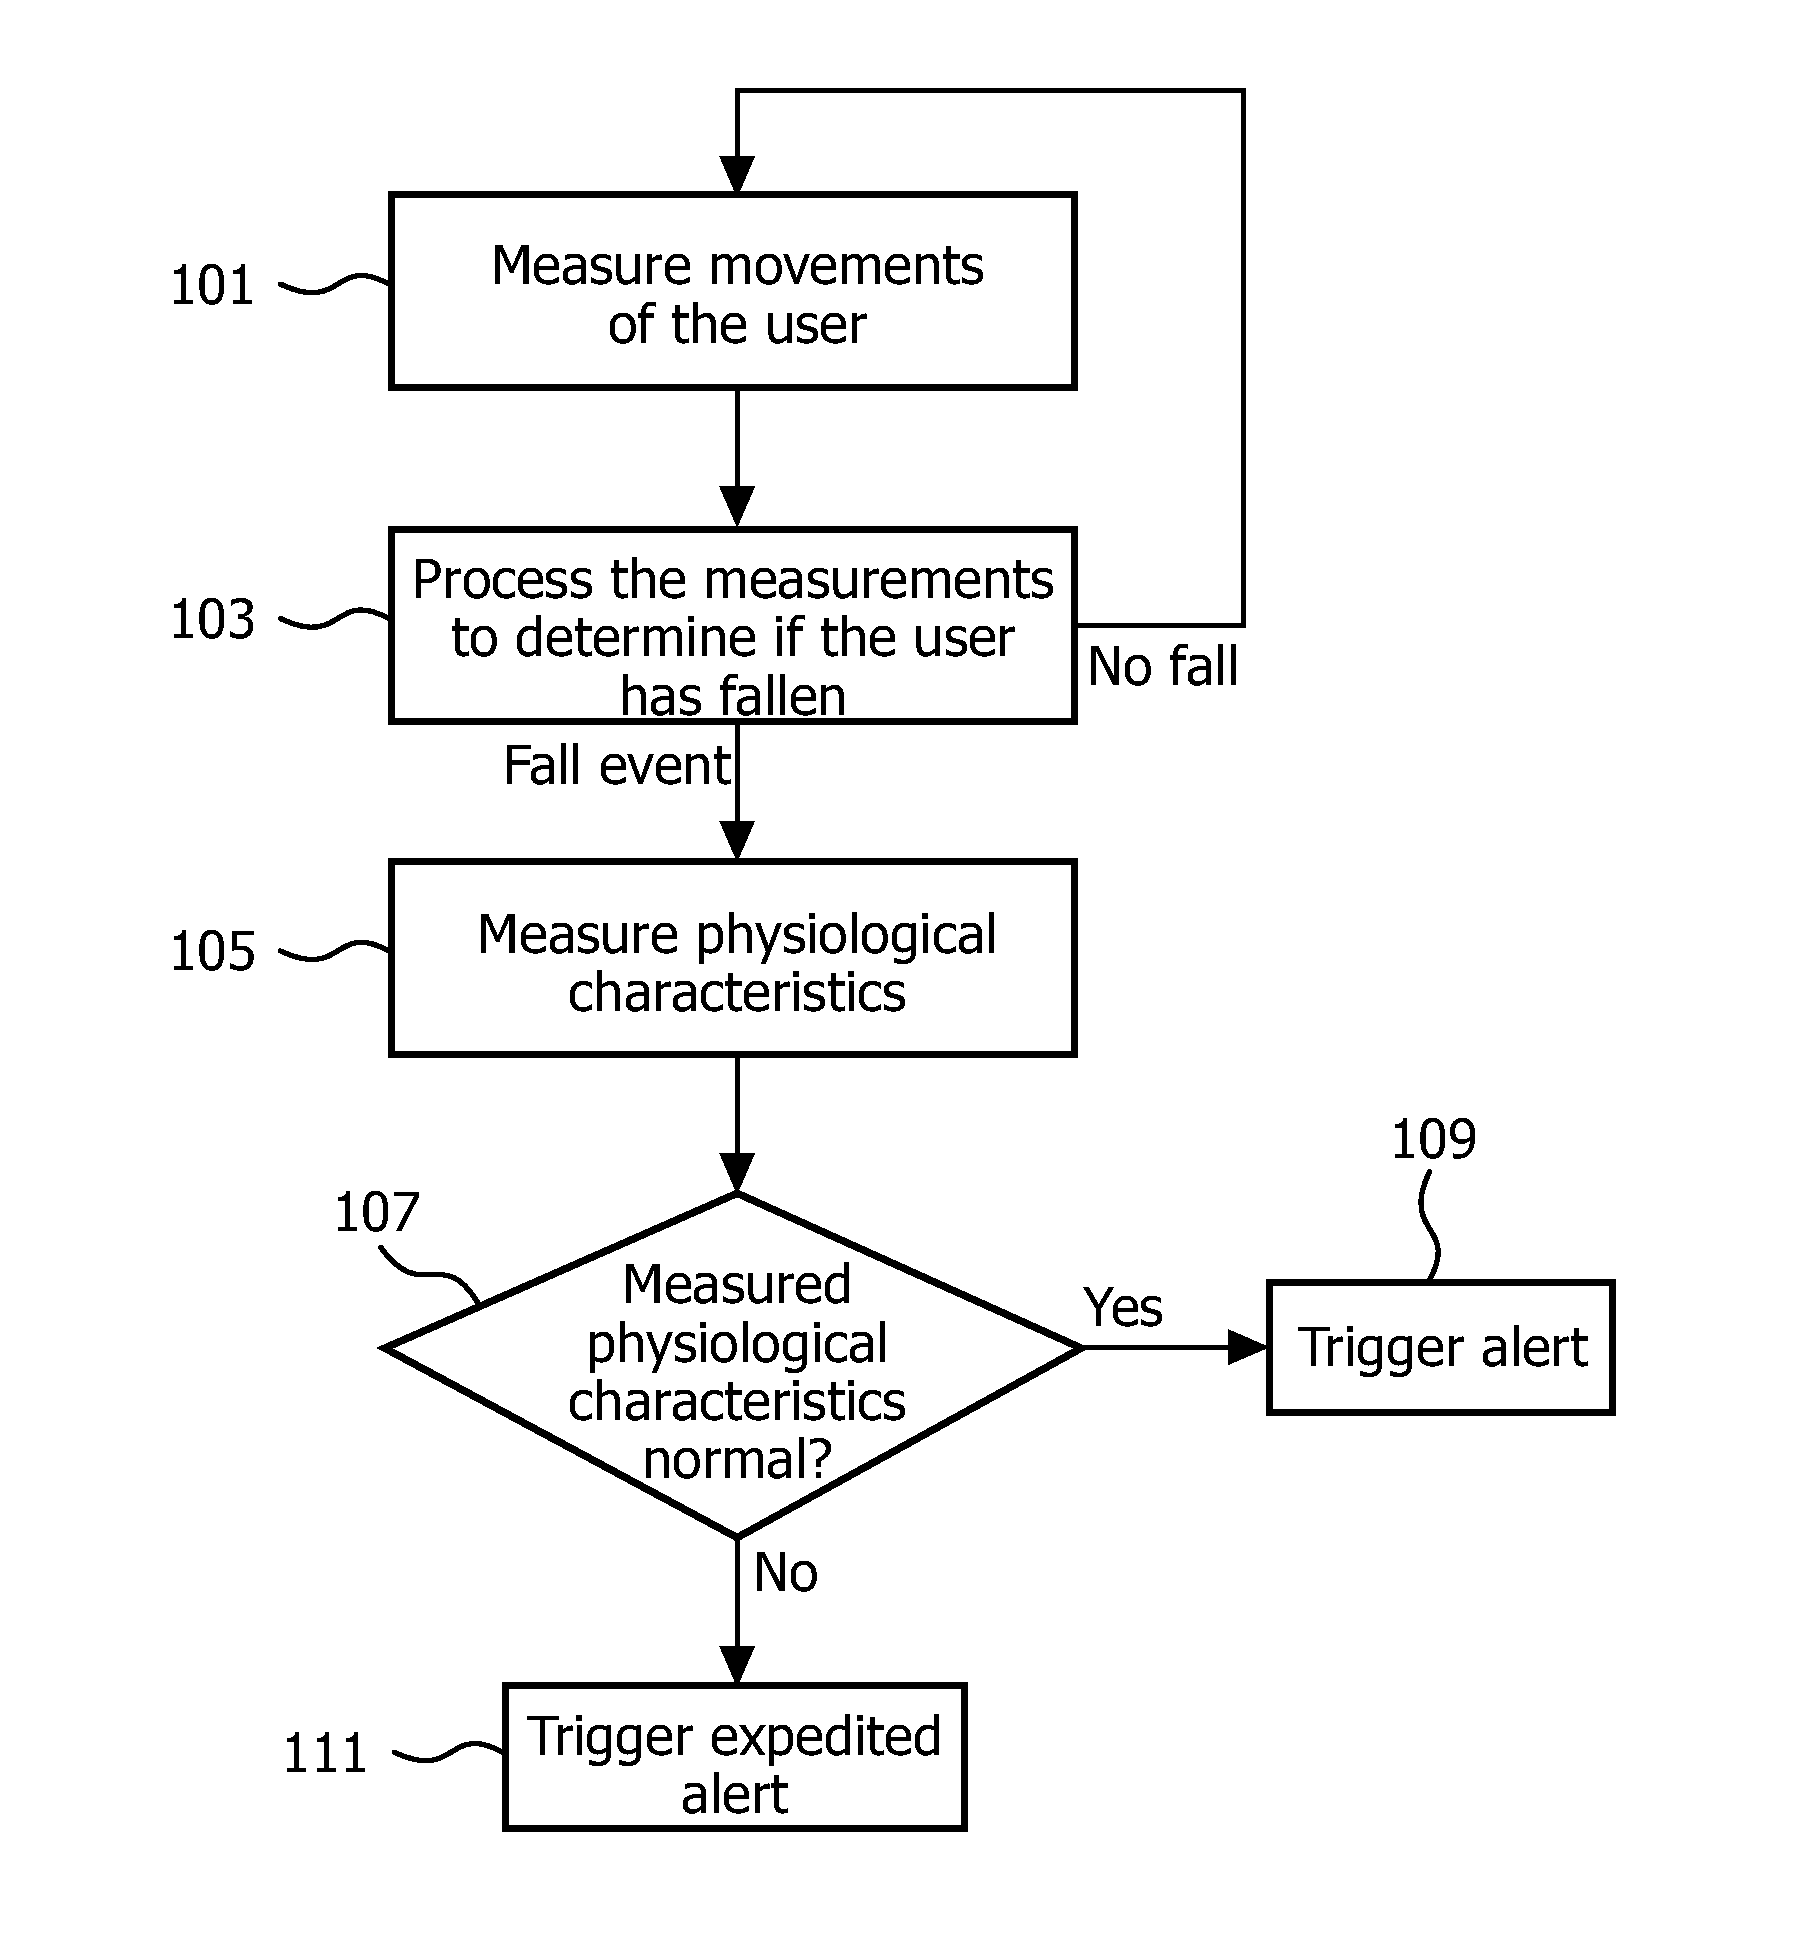 Apparatus for use in a fall detector or fall detection system, and a method of operating the same